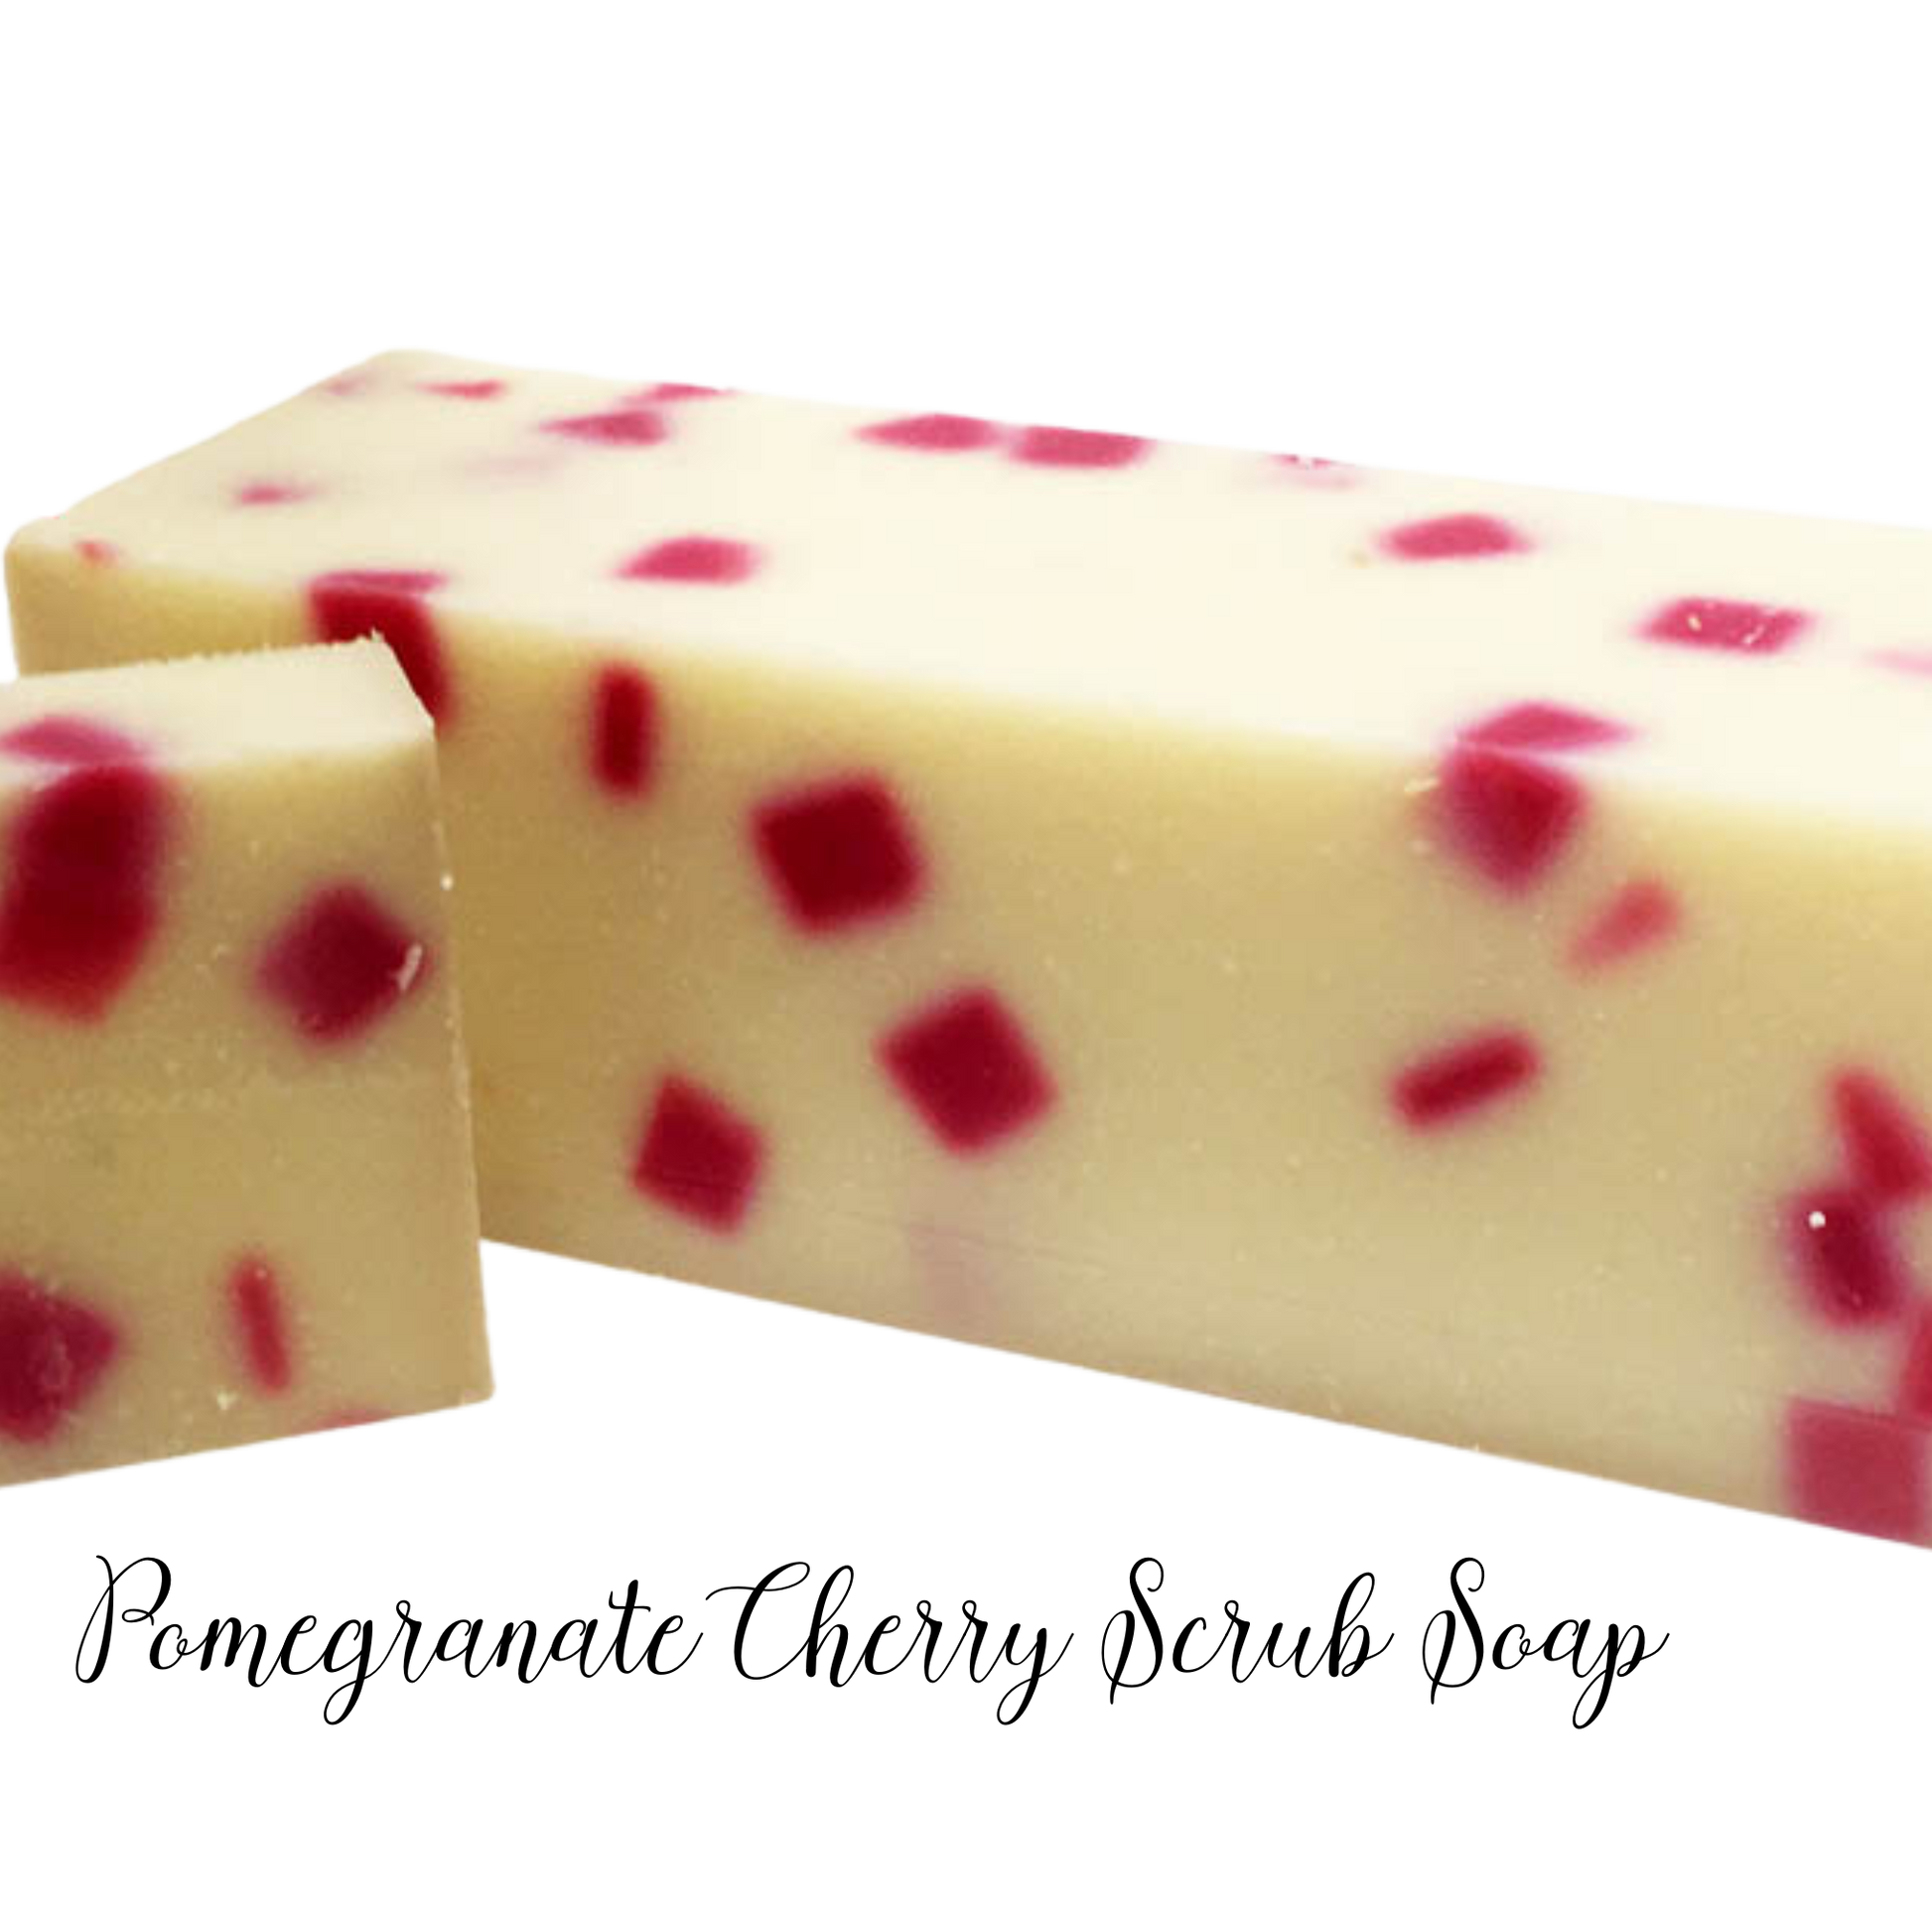 Smells like wild cherries blended with pomegranate and touches of tangerine and another citrus.  5.5 bar soap